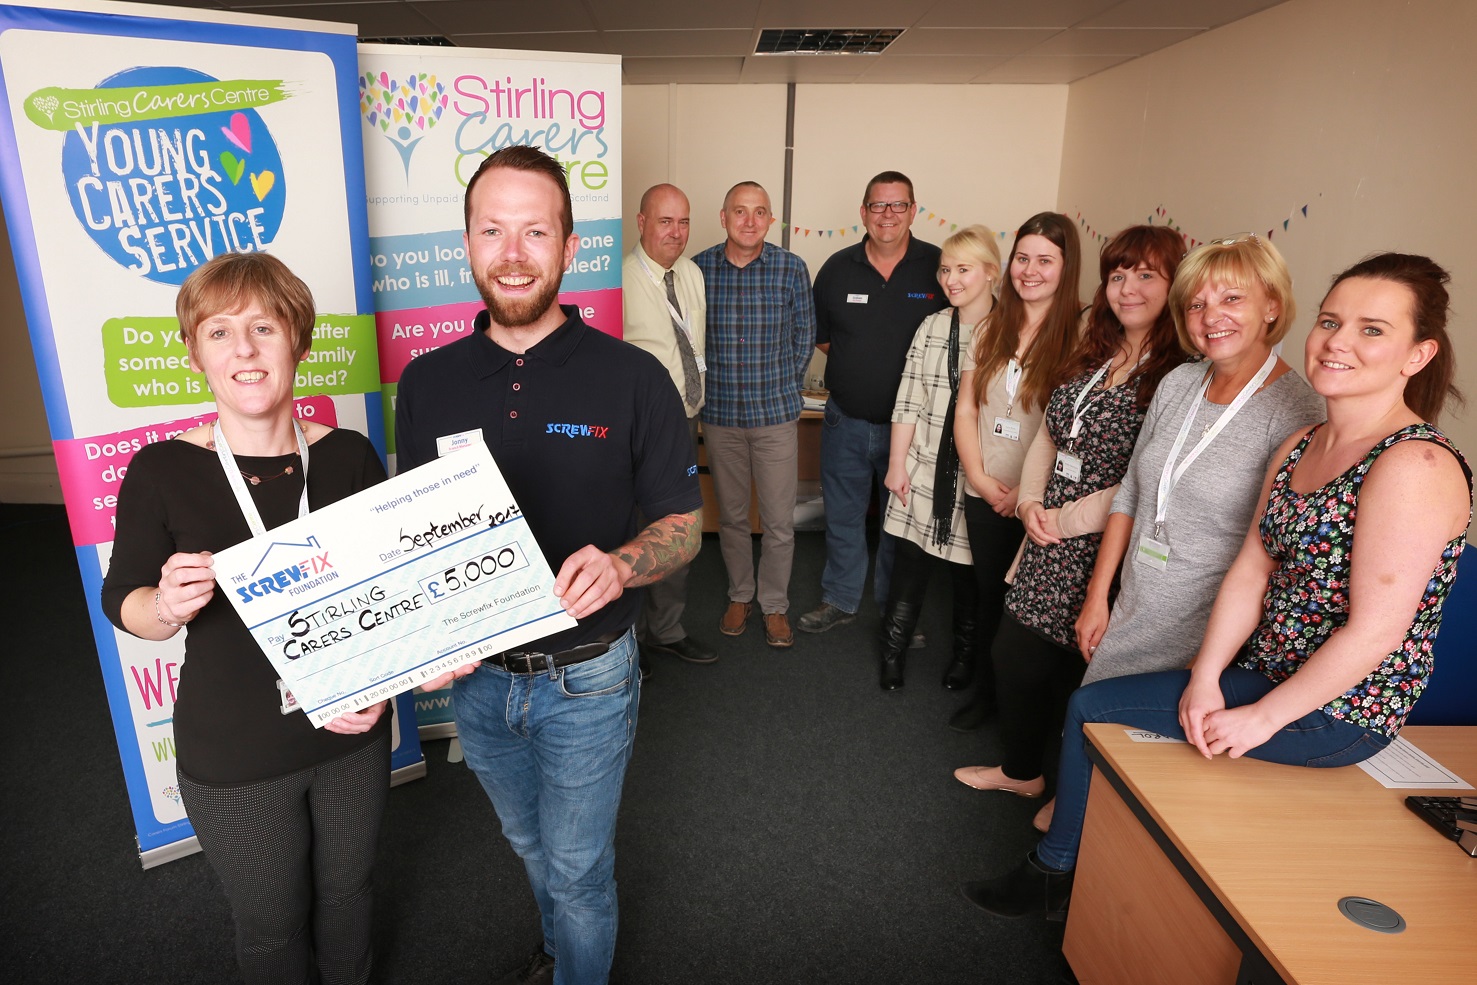 Stirling Carers Centre receives generous donation from the Screwfix Foundation